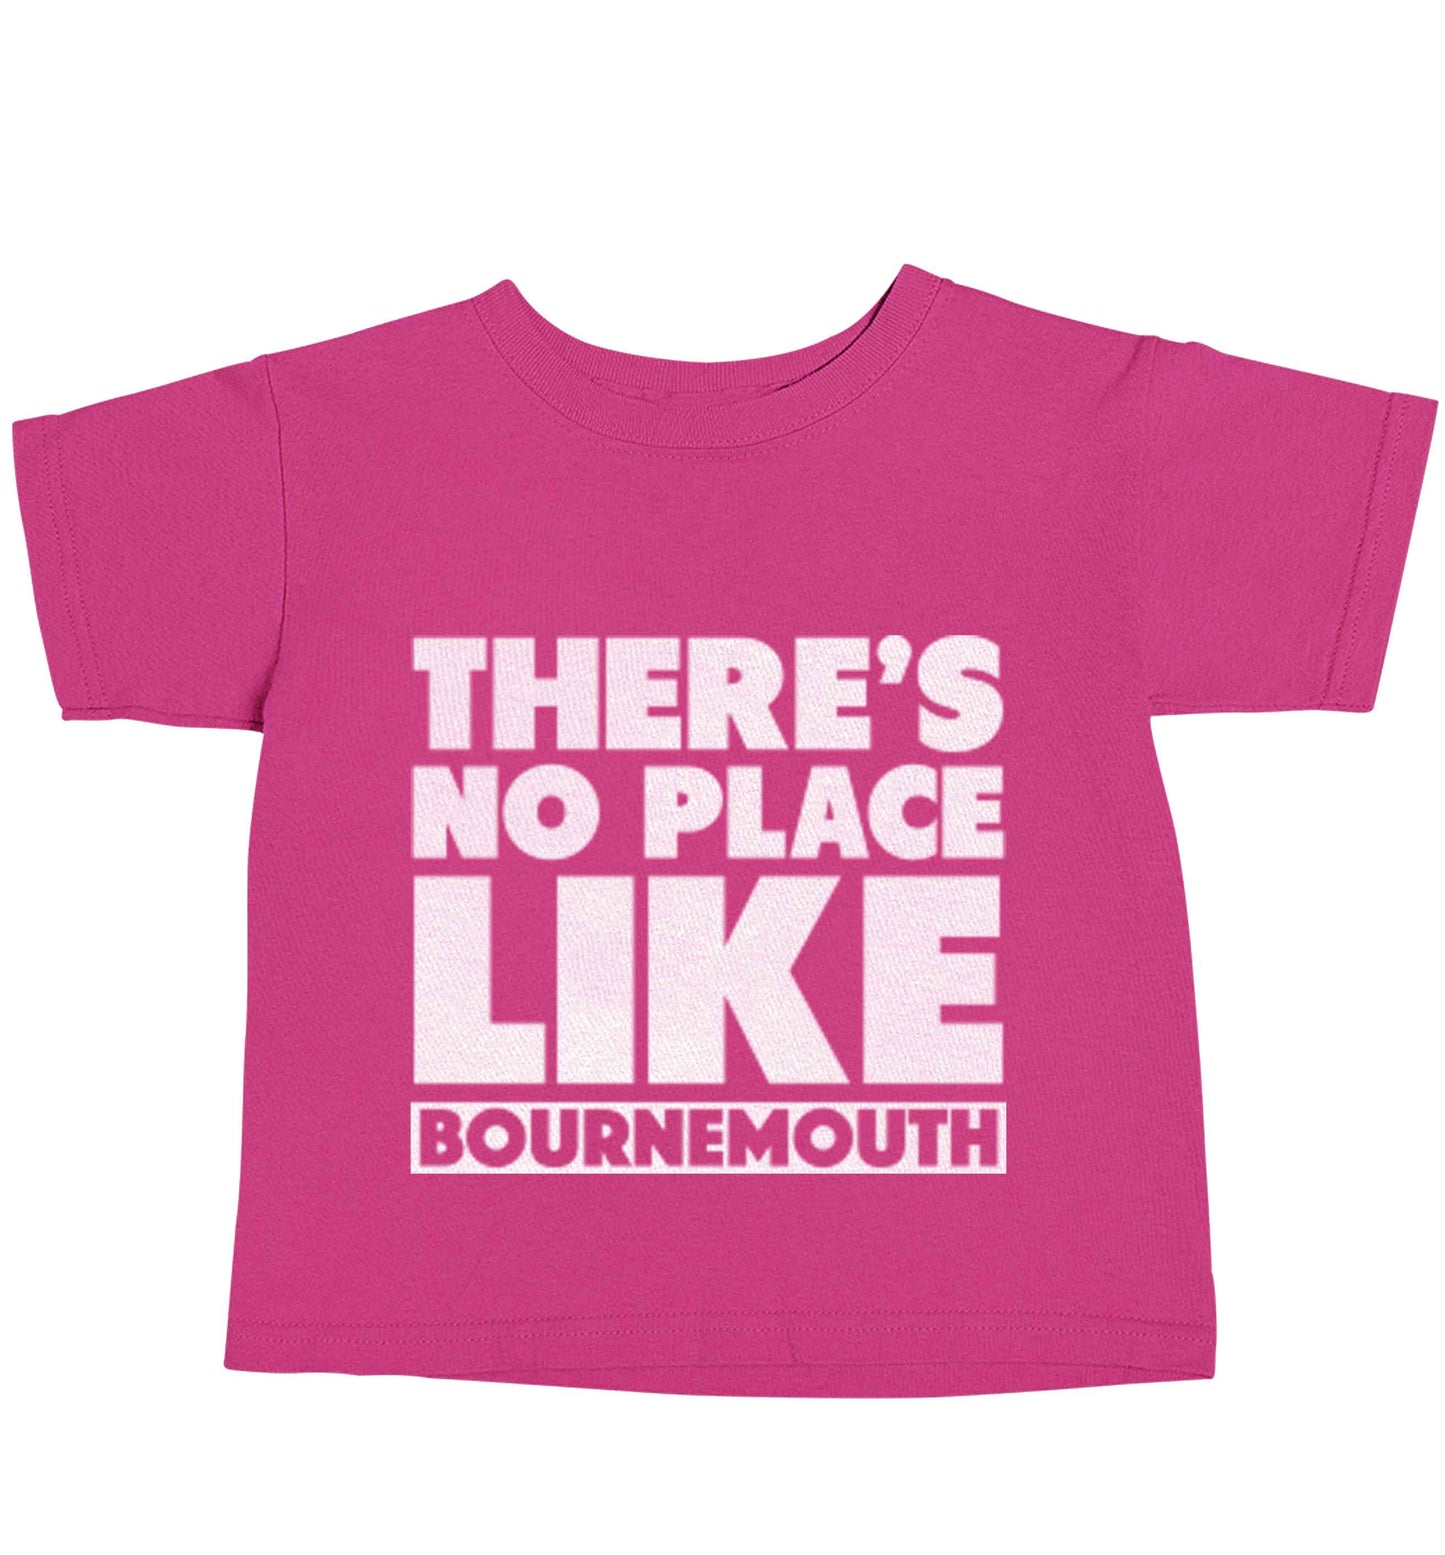 There's no place like Bournemouth pink baby toddler Tshirt 2 Years